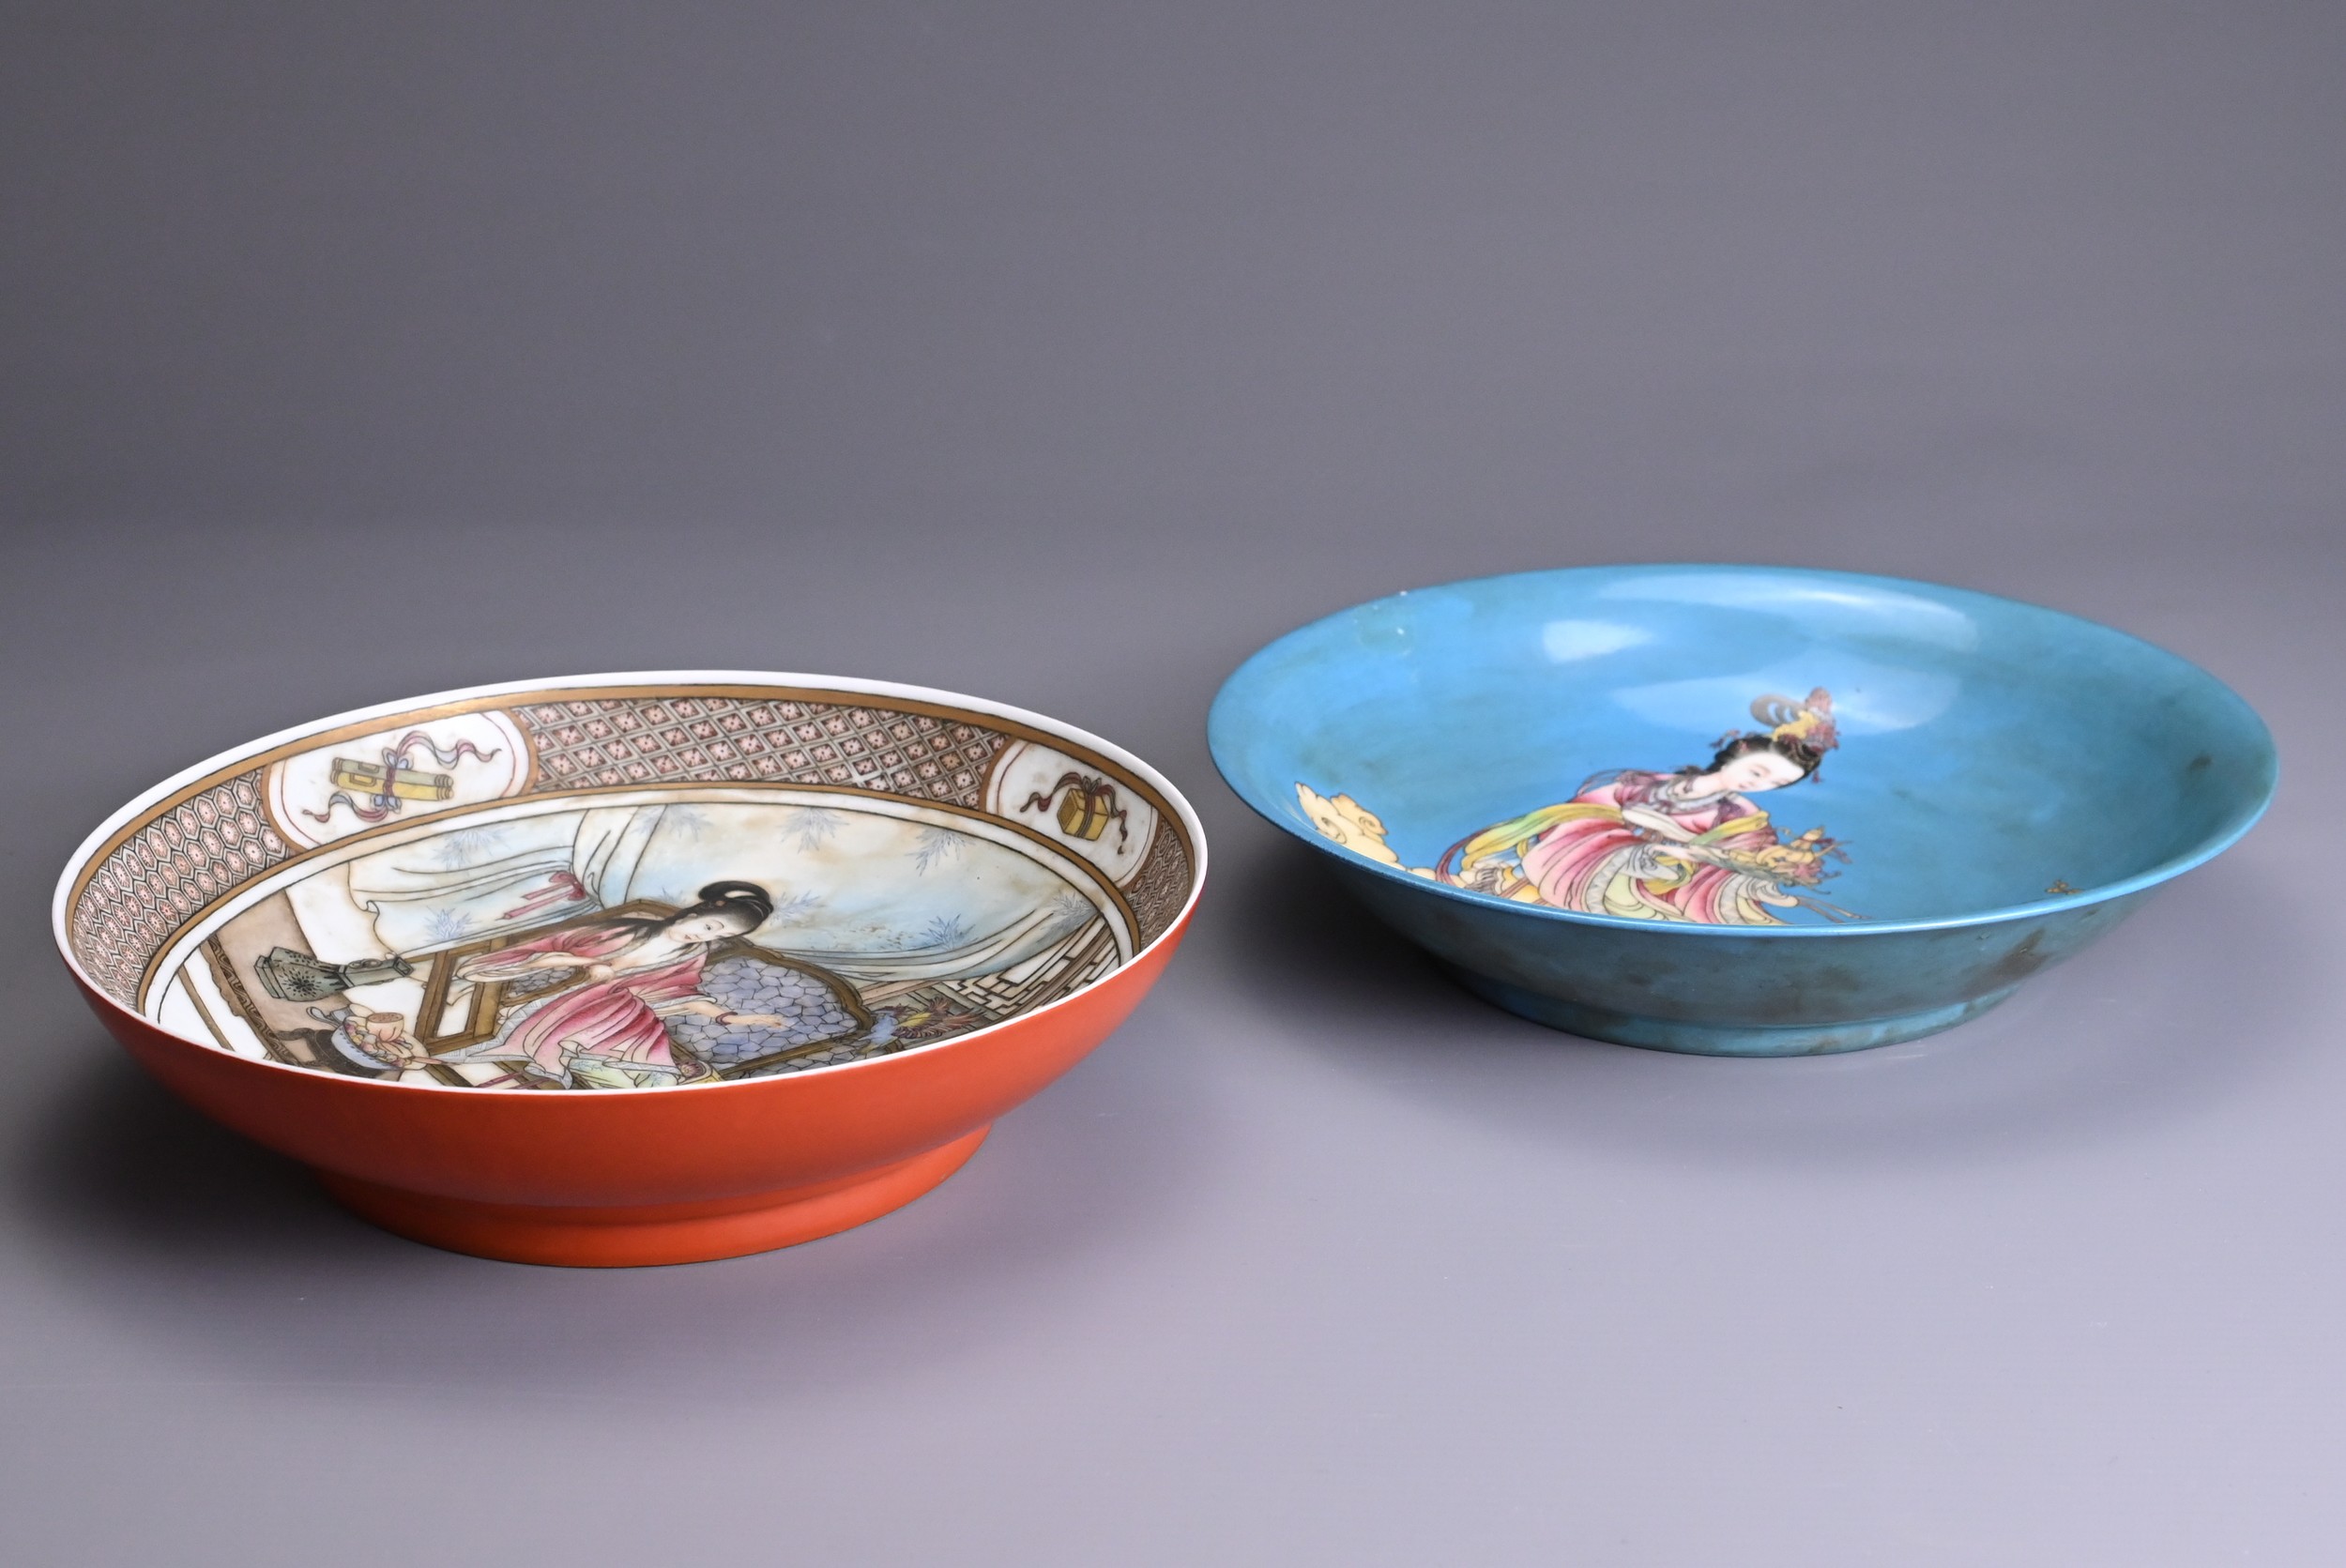 TWO CHINESE PORCELAIN FAMILLE ROSE CIRCULAR DISHES, 20TH CENTURY. Each with iron-red enamel and gilt - Image 7 of 7